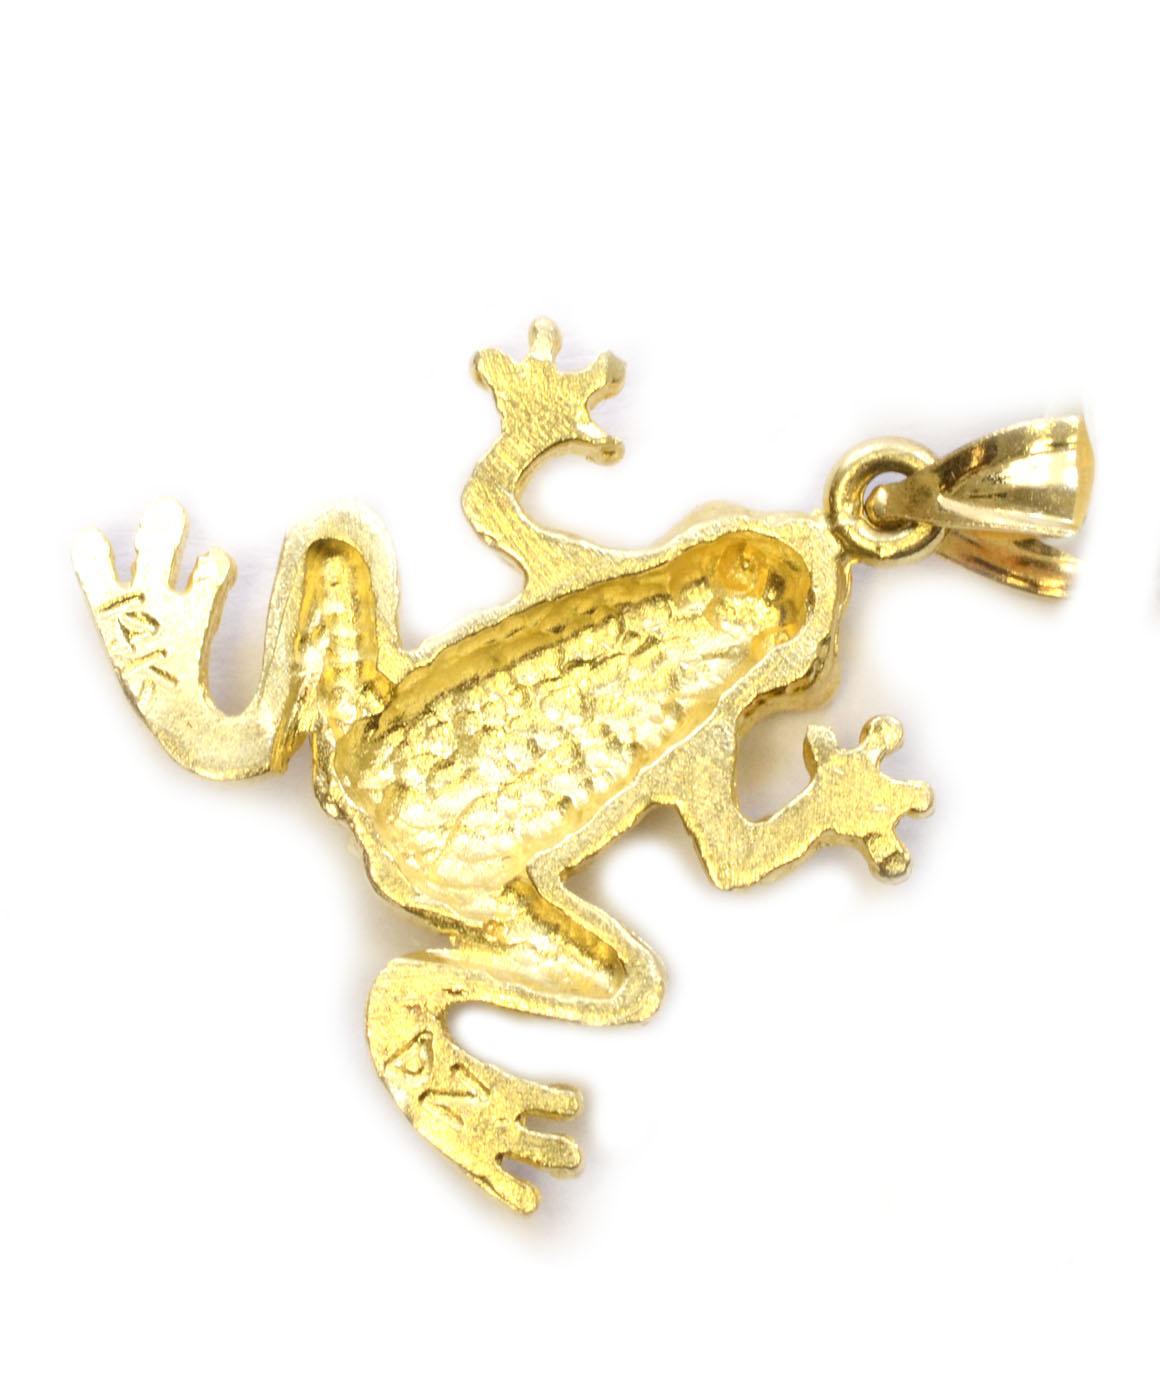 
This charm / pendant measures approximately 2cm including bail, by 1.5cm wide. Please see photos for details! 